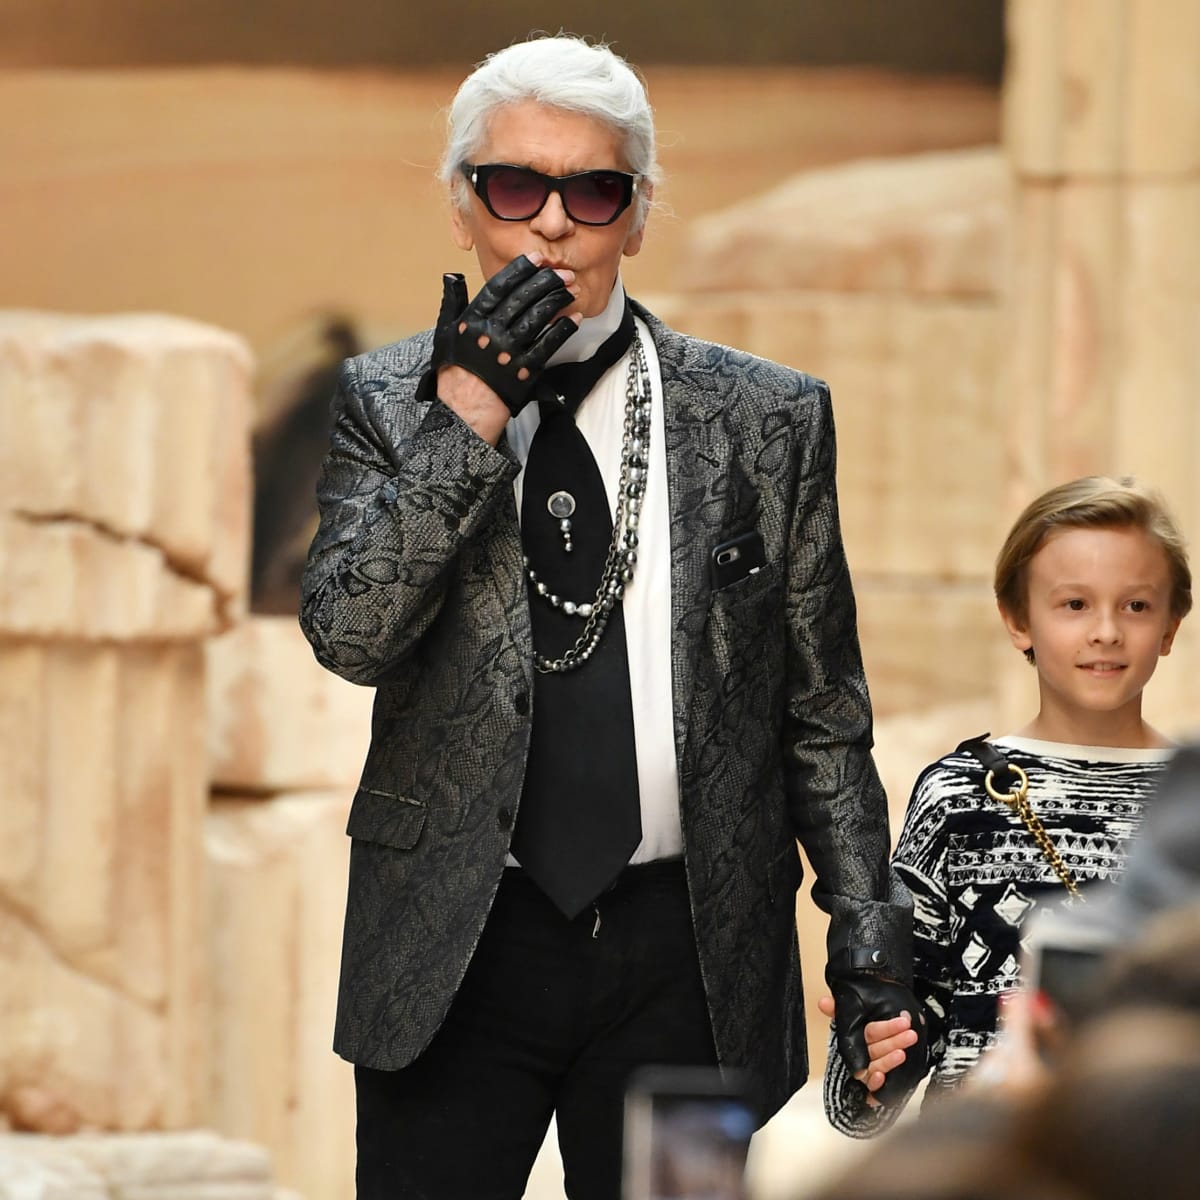 Karl Lagerfeld, iconic Chanel fashion designer, has died at 85